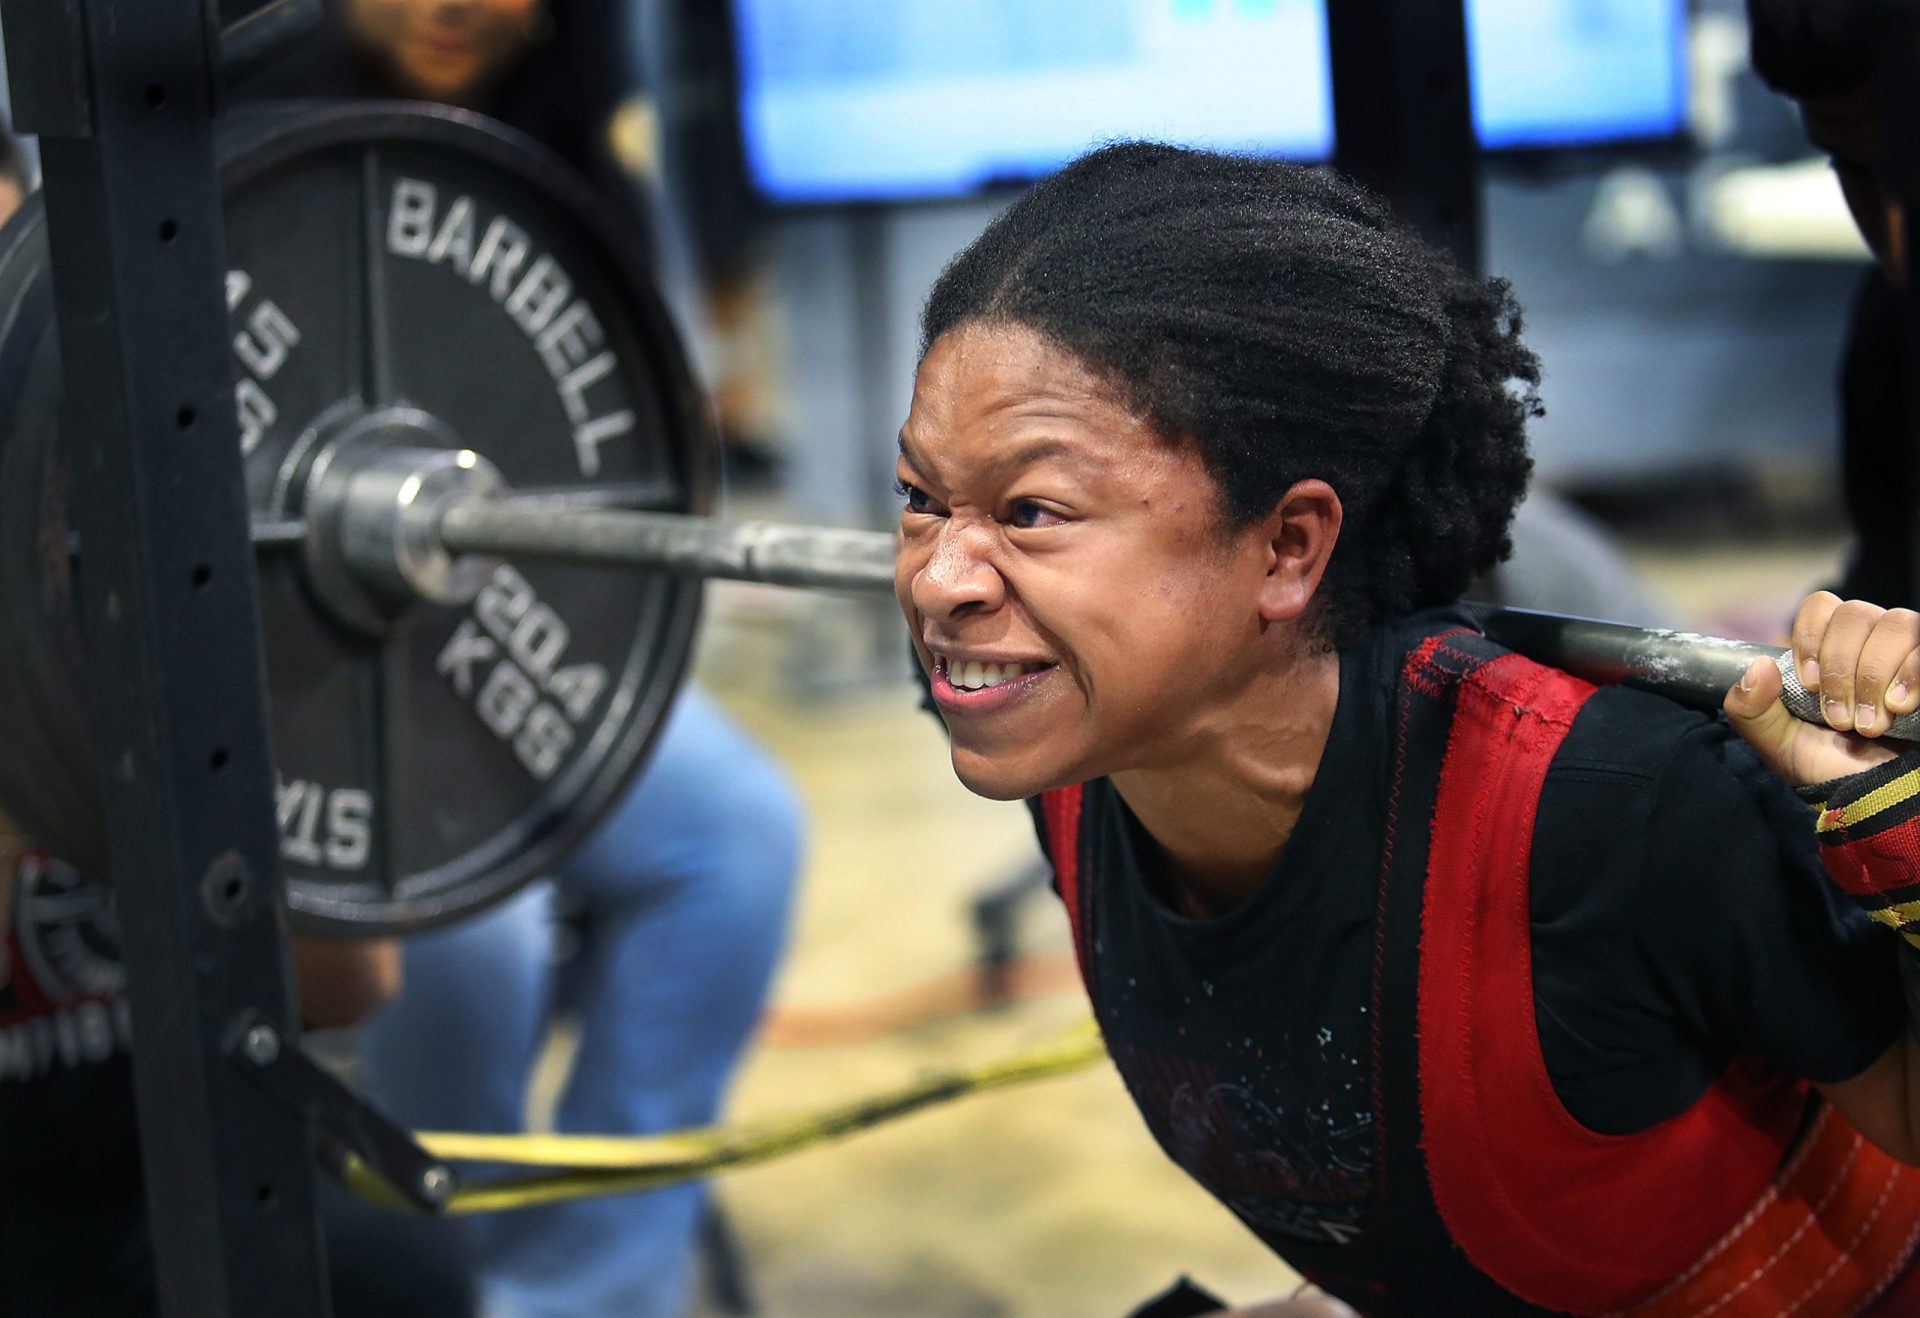 Rapper beats female weightlifting records while 'identifying as a